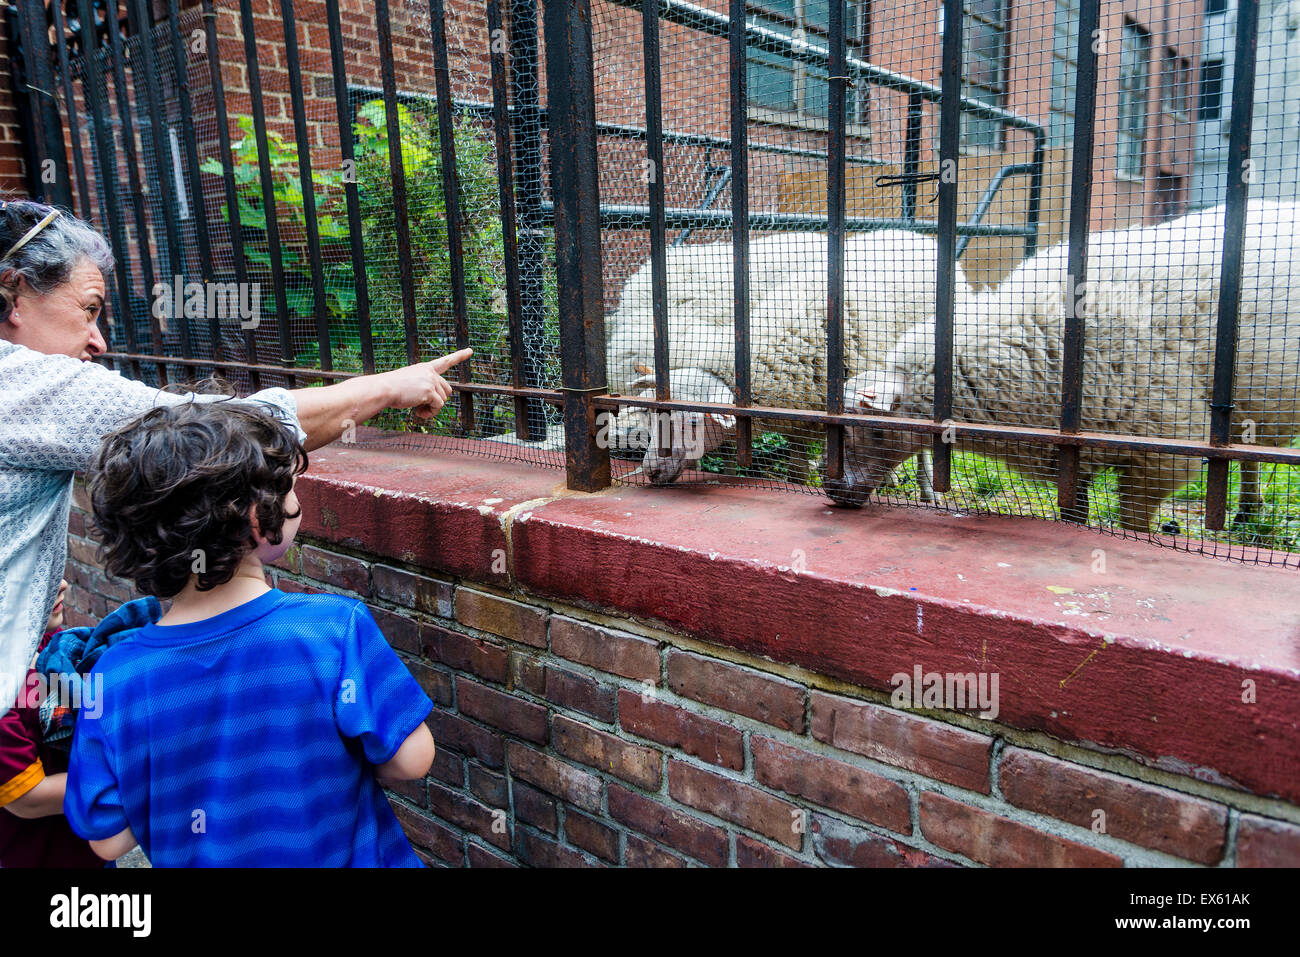 New York, USA. 07th July, 2015. Passersby enjoy the three sheep, named Elizabeth, Mott and Mulberry, who graze in the cemetery of the Roman Catholic Basilica of St. Patrick’s Old Cathedral in Nolita. The lambs fulfill a pastoral vision set by Msgr. Donald Sakano, the church’s pastor, as St Patrick's prepares to mark it's 200th Anniversary. The sheep will be on view through Saturday Credit:  Stacy Walsh Rosenstock/Alamy Live News Stock Photo